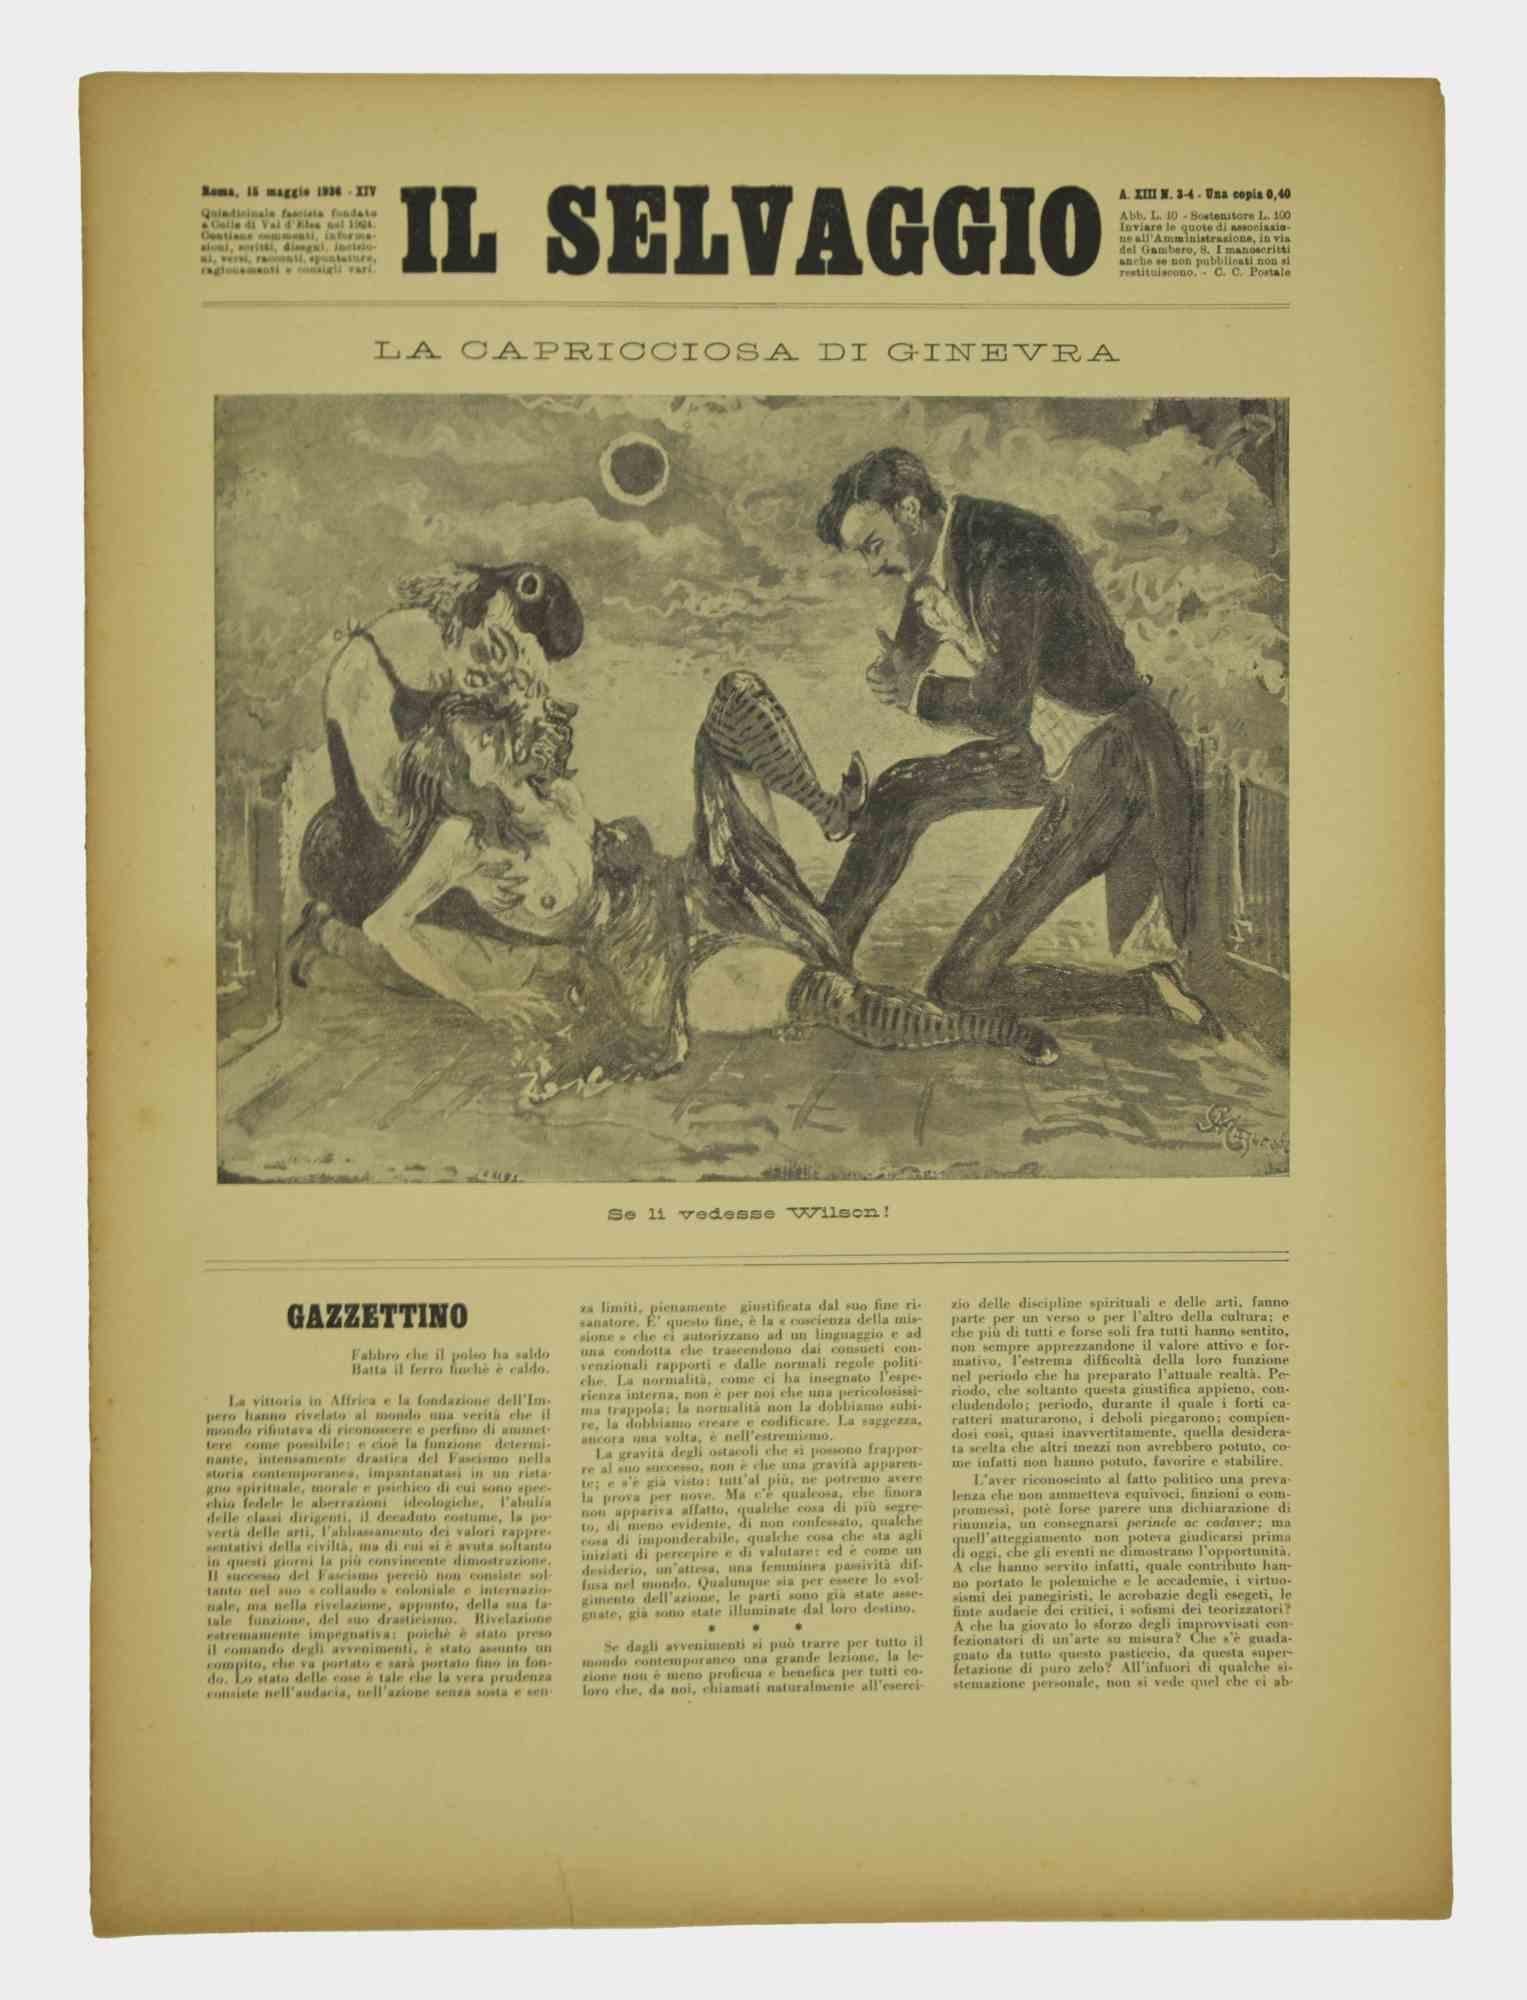 Flipping through a few pages of " Il Selvaggio, no.3-4- 1936 ", "Annual supporter subscription - Una copia 40 Cent - Fortnightly Newspaper letters arts and sciences", we find, in the dossier Roma,15 Febbraio1934, Engraving by the artist Mino